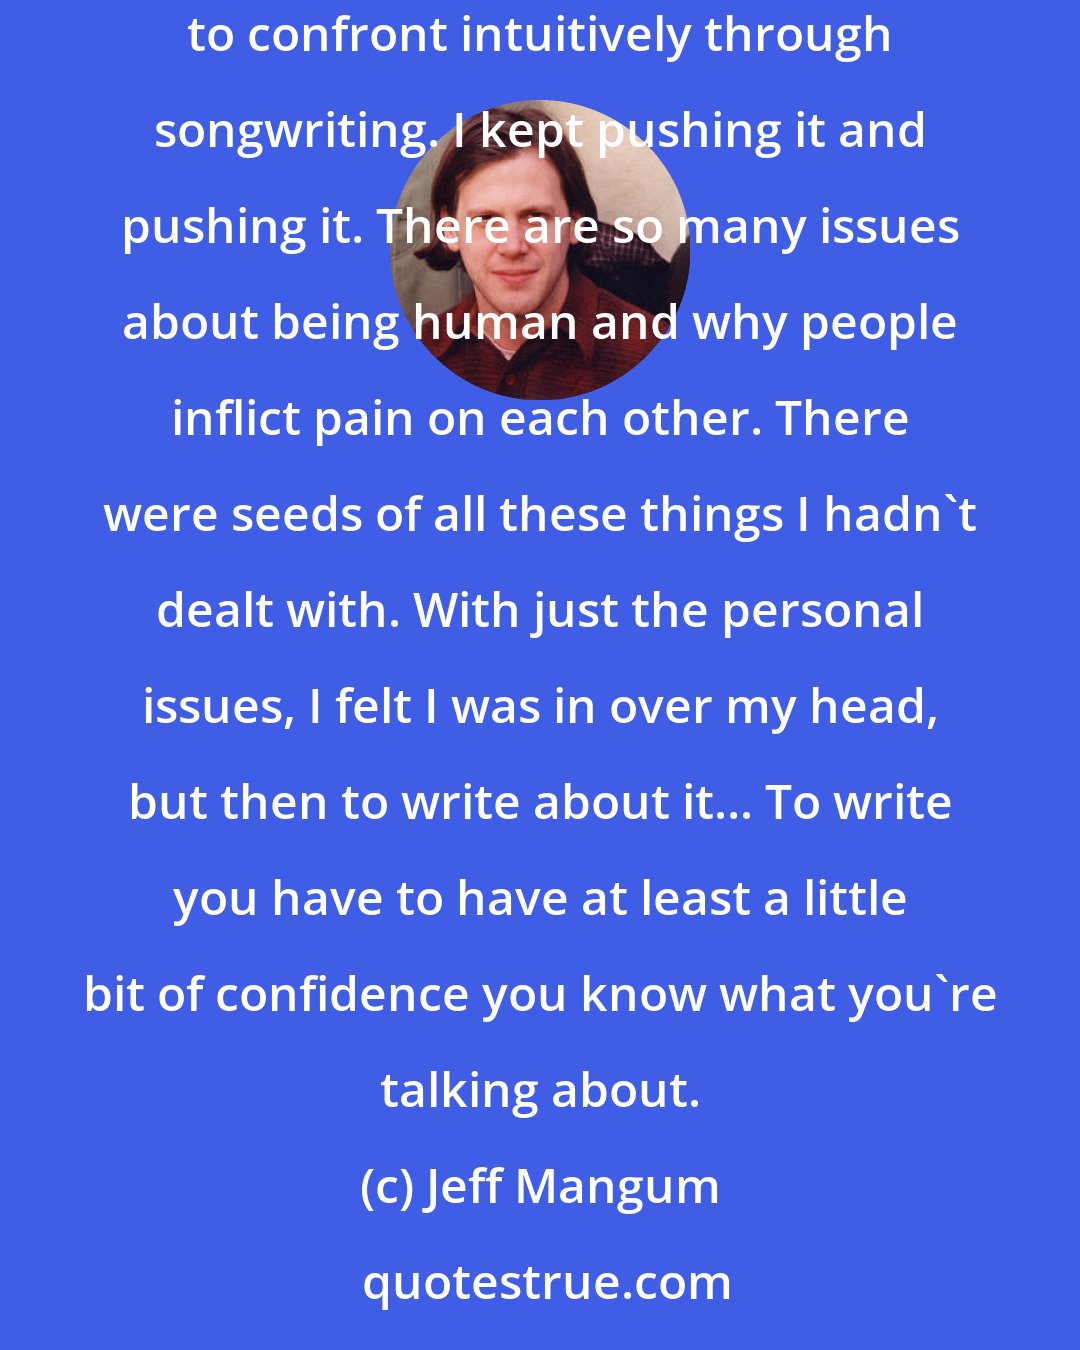 Jeff Mangum: I think the songs I was writing after Aeroplane were full of a lot of undealt-with pain that was just a little too big... the issues seemed too large for me to confront intuitively through songwriting. I kept pushing it and pushing it. There are so many issues about being human and why people inflict pain on each other. There were seeds of all these things I hadn't dealt with. With just the personal issues, I felt I was in over my head, but then to write about it... To write you have to have at least a little bit of confidence you know what you're talking about.